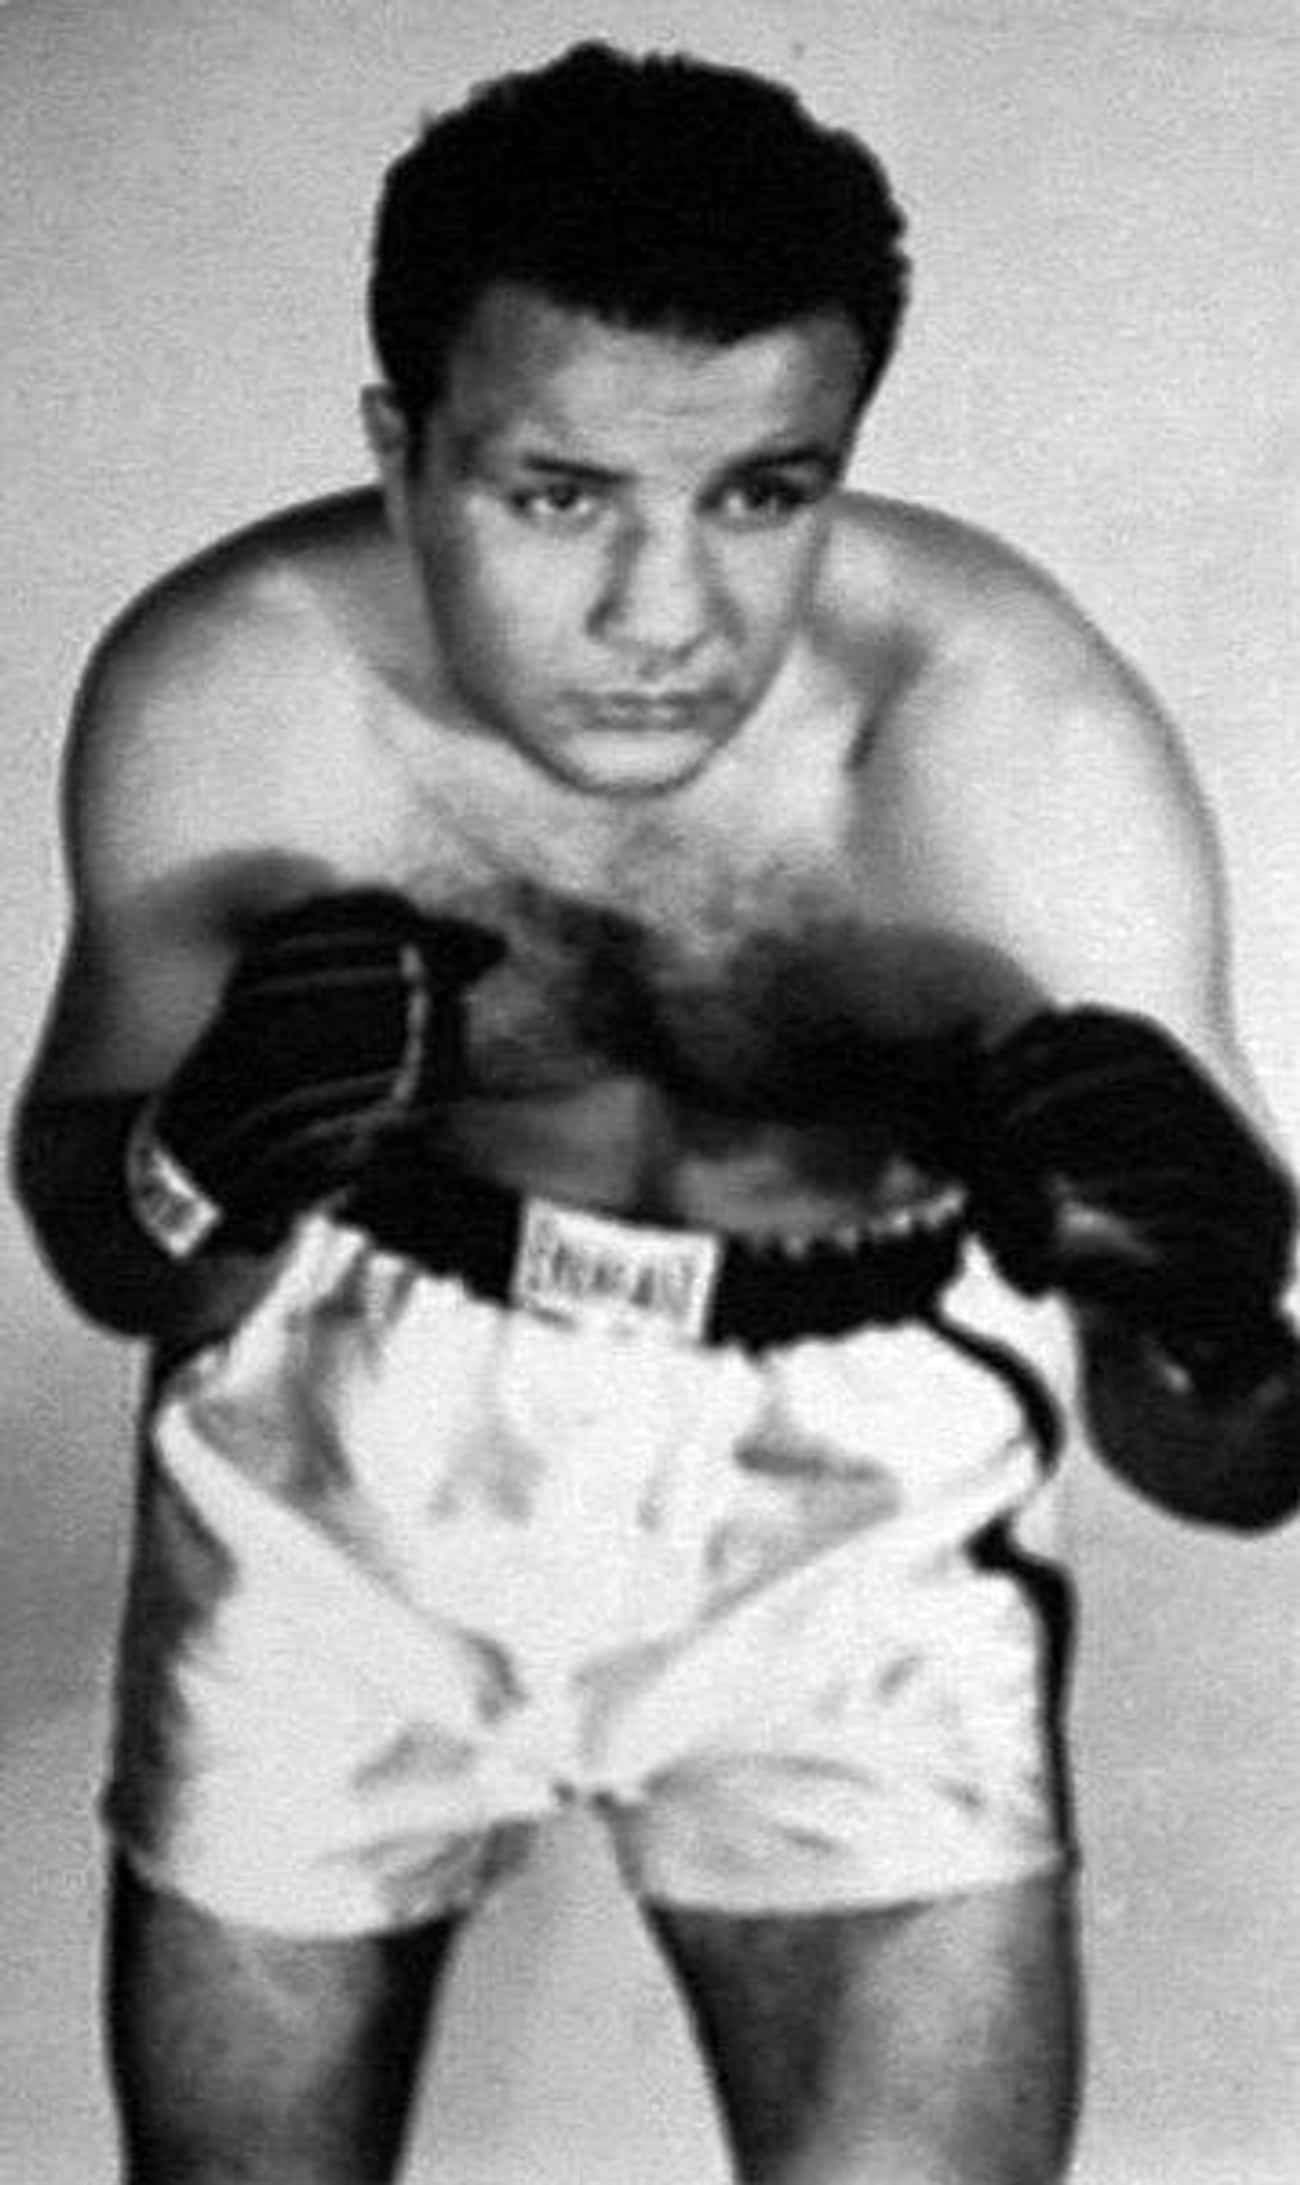 Rocky Graziano: 'Me And Jake LaMotta Grew Up In The Same Neighborhood. You Wanna Know How Popular Jake Was? When We Played Hide And Seek, Nobody Ever Looked For LaMotta.'